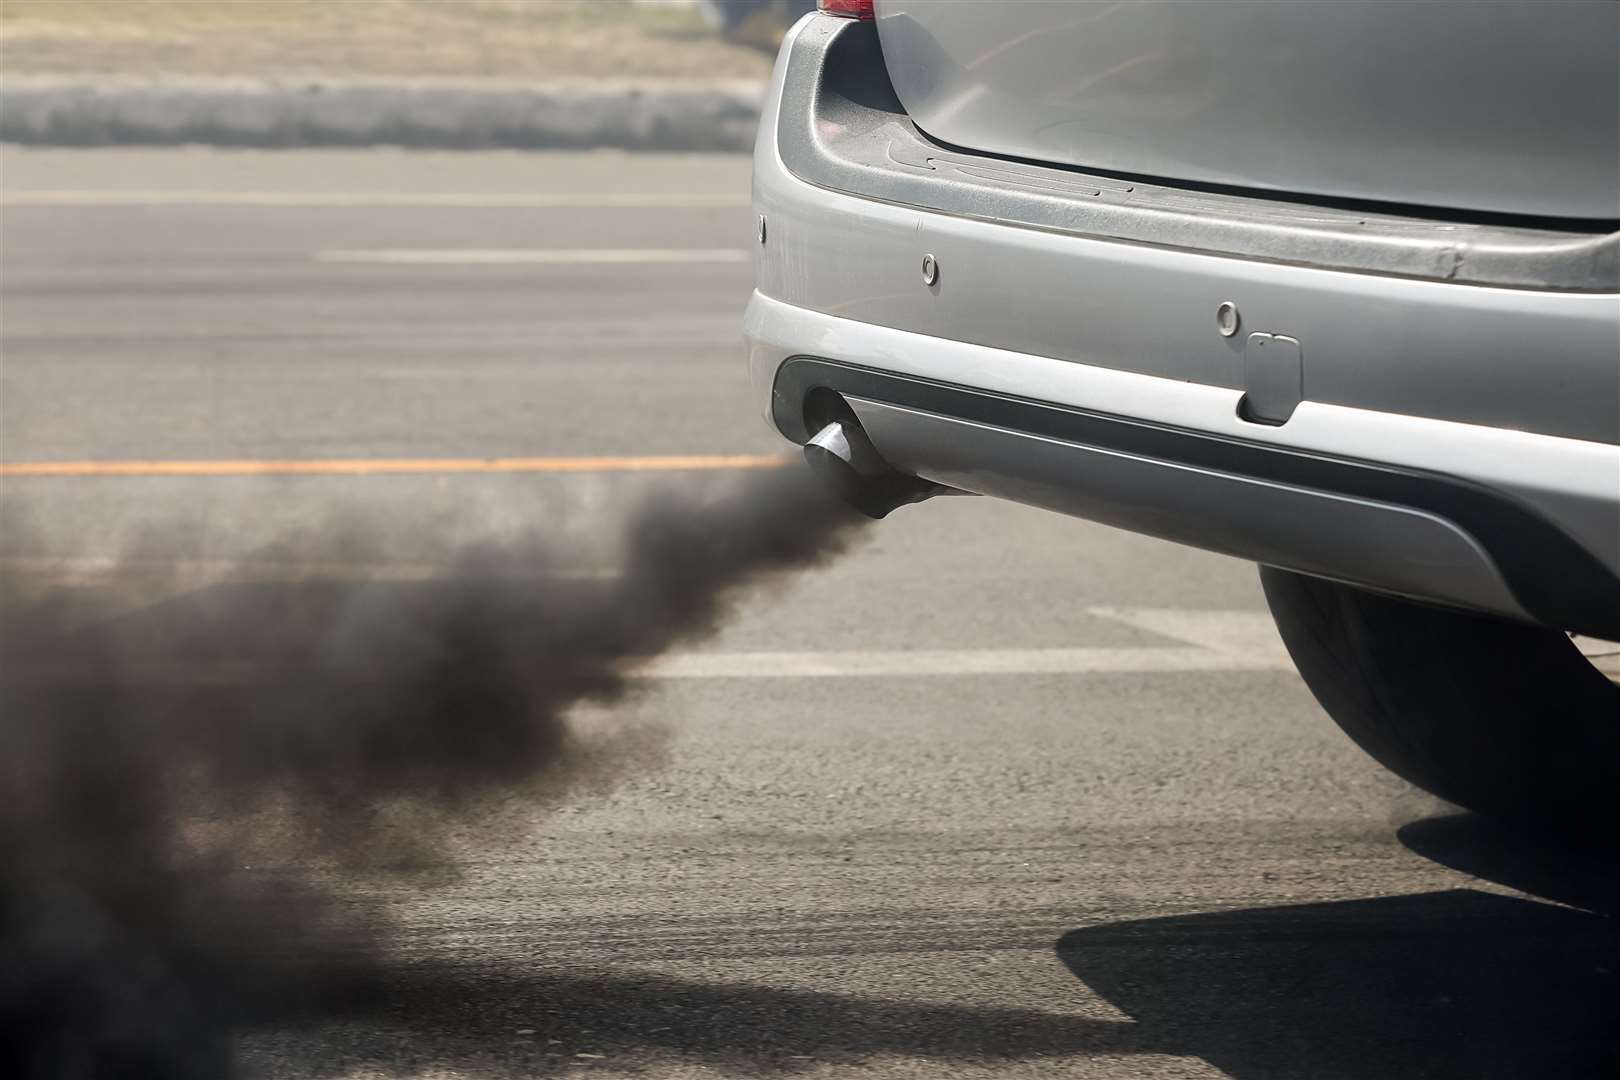 Further action is being considered to tackle air pollution from polluting vehicles